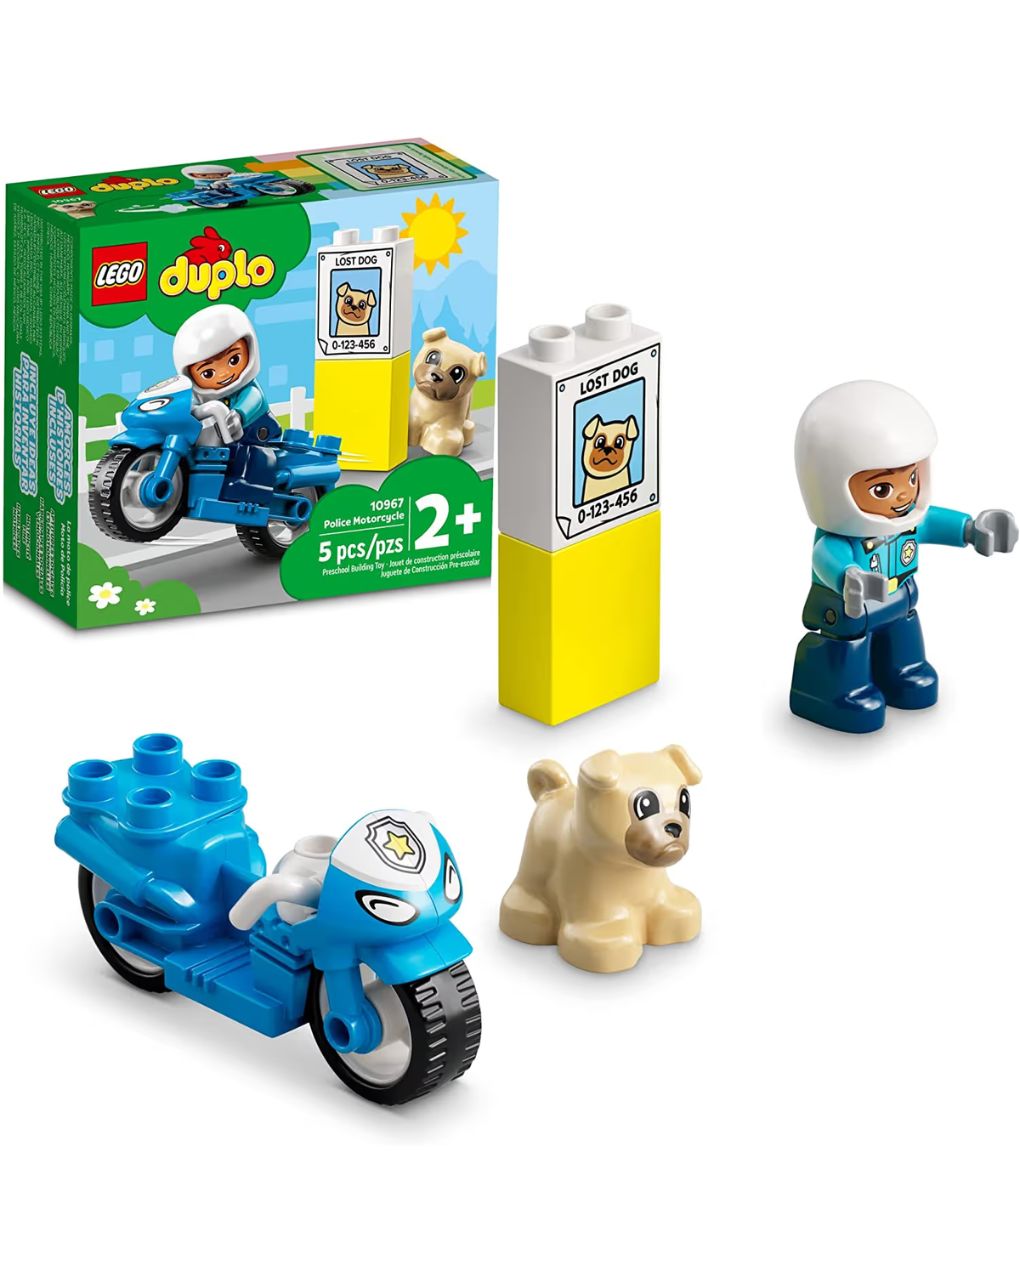 Lego duplo town police motorcycle 10967